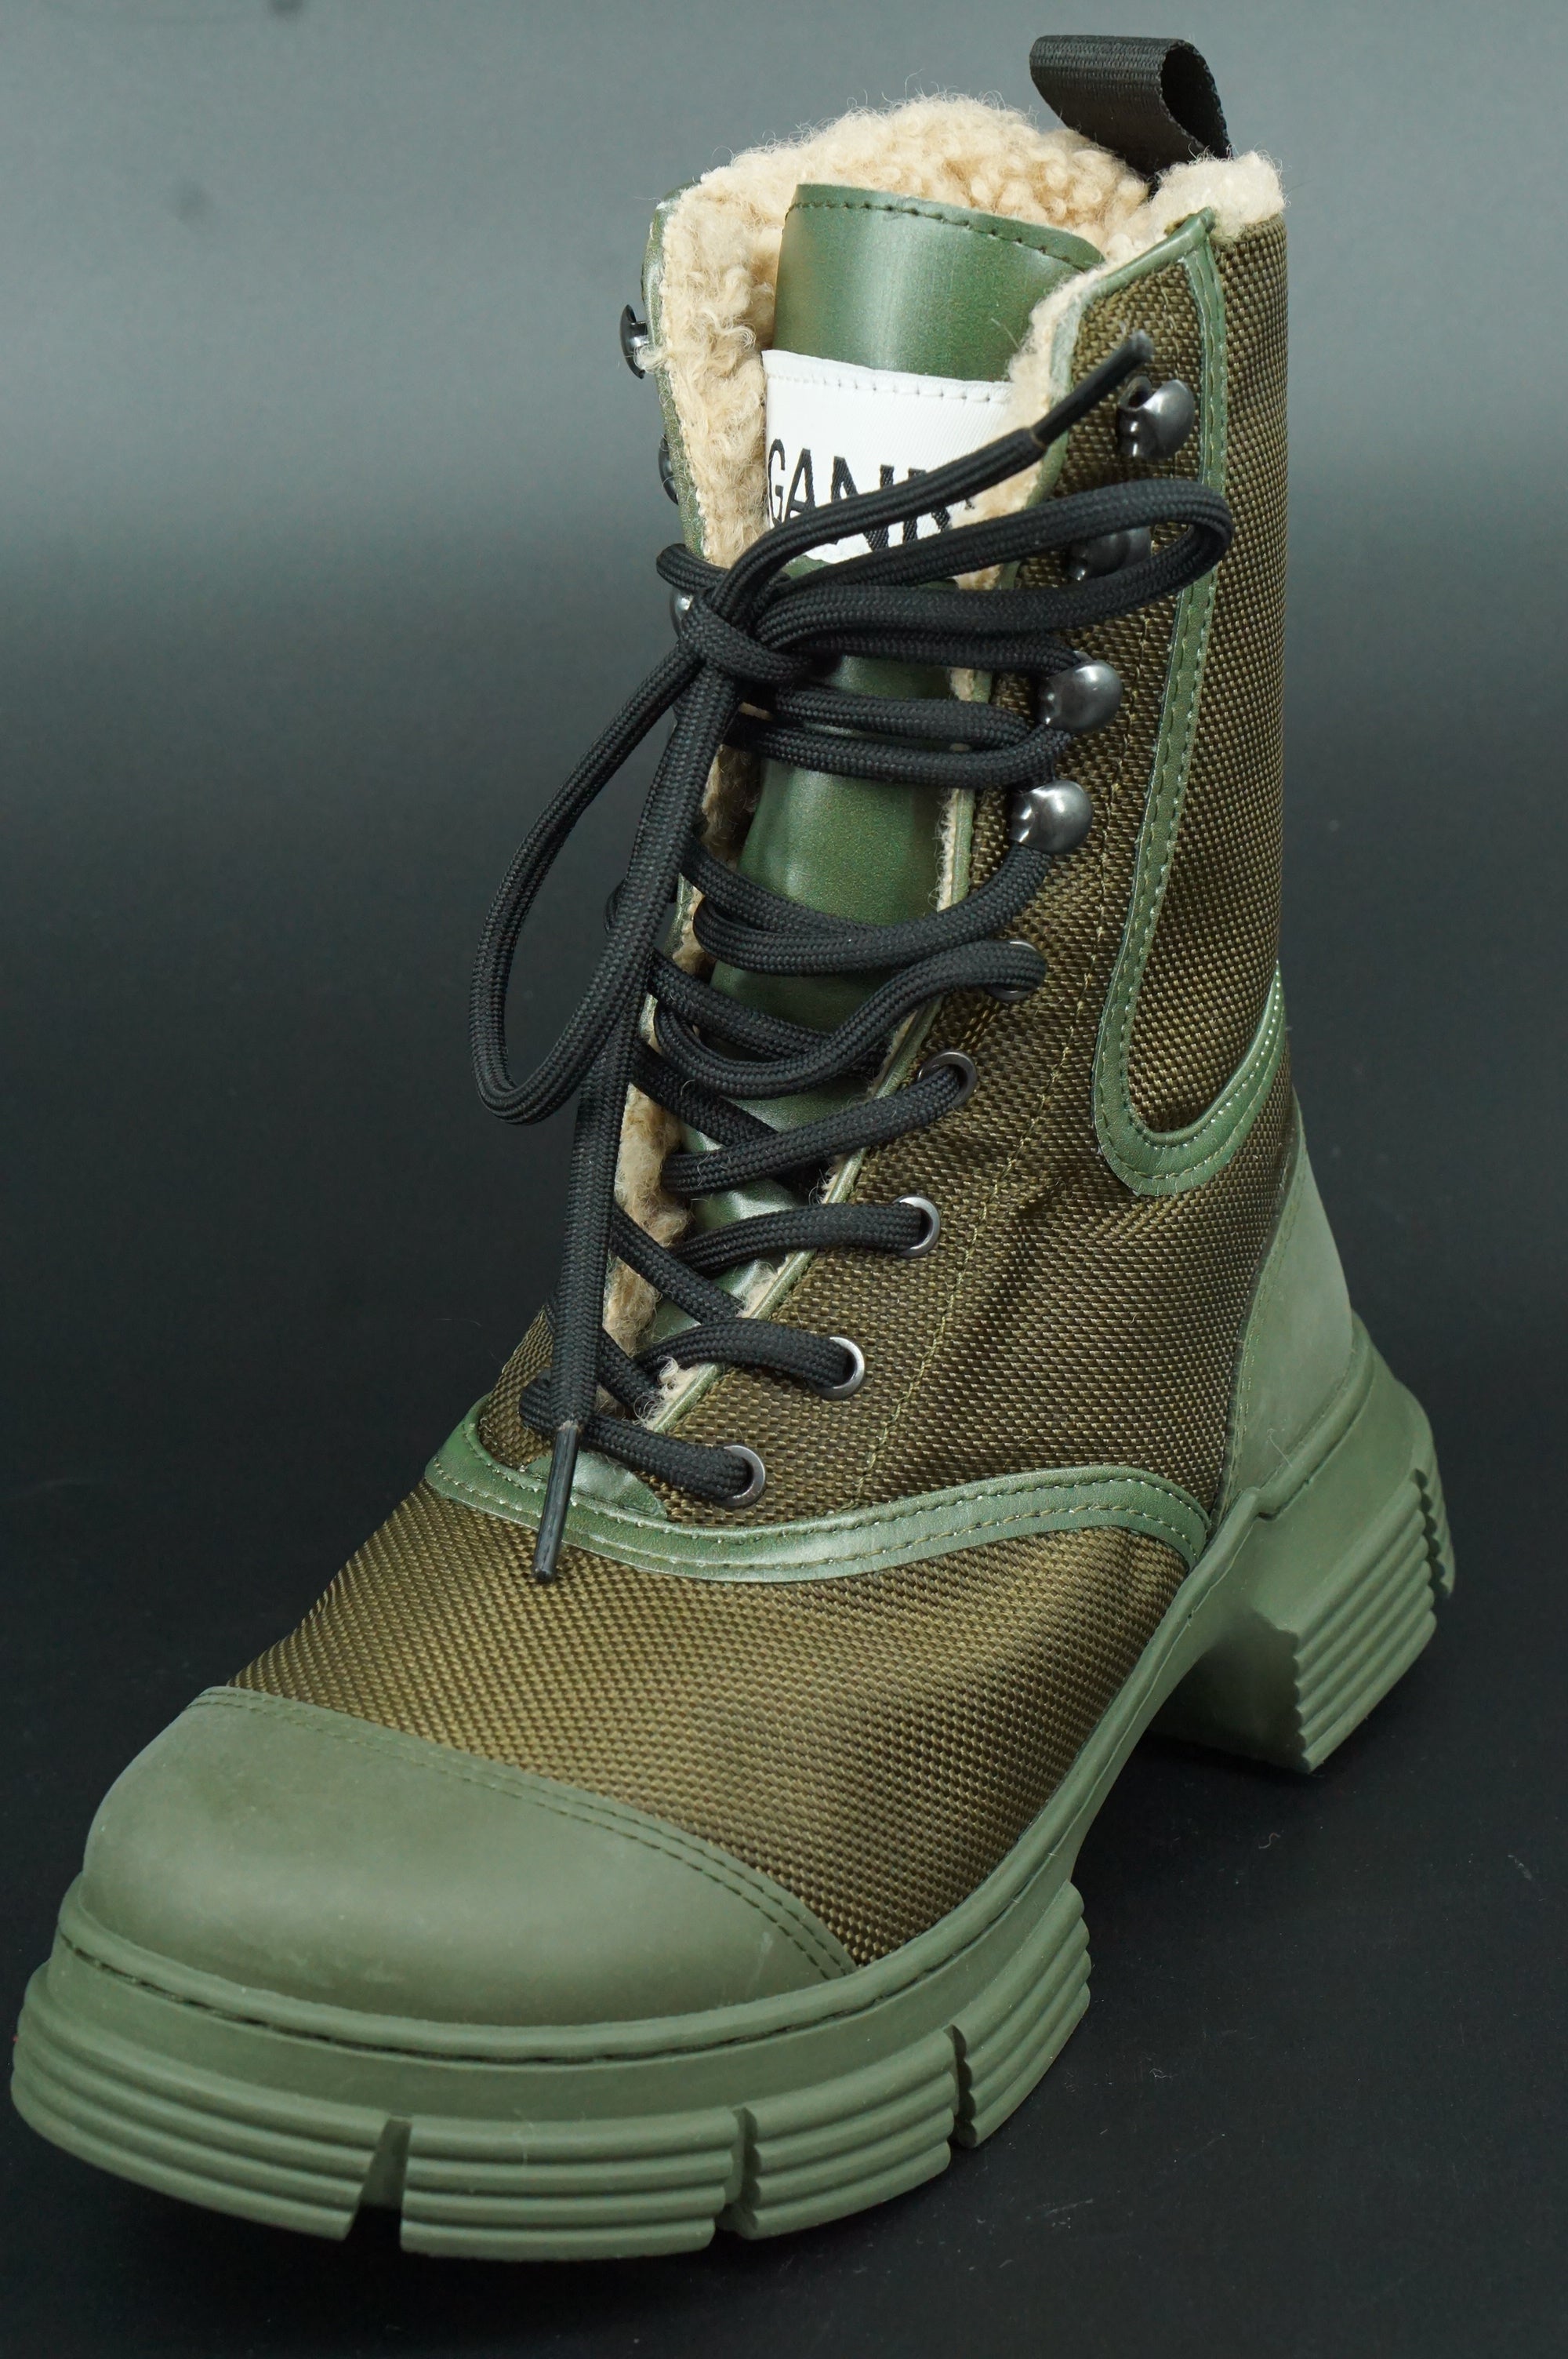 GANNI Shearling Hiking Ankle Combat Boots Size 36 New $375 Green Tubular Rubber